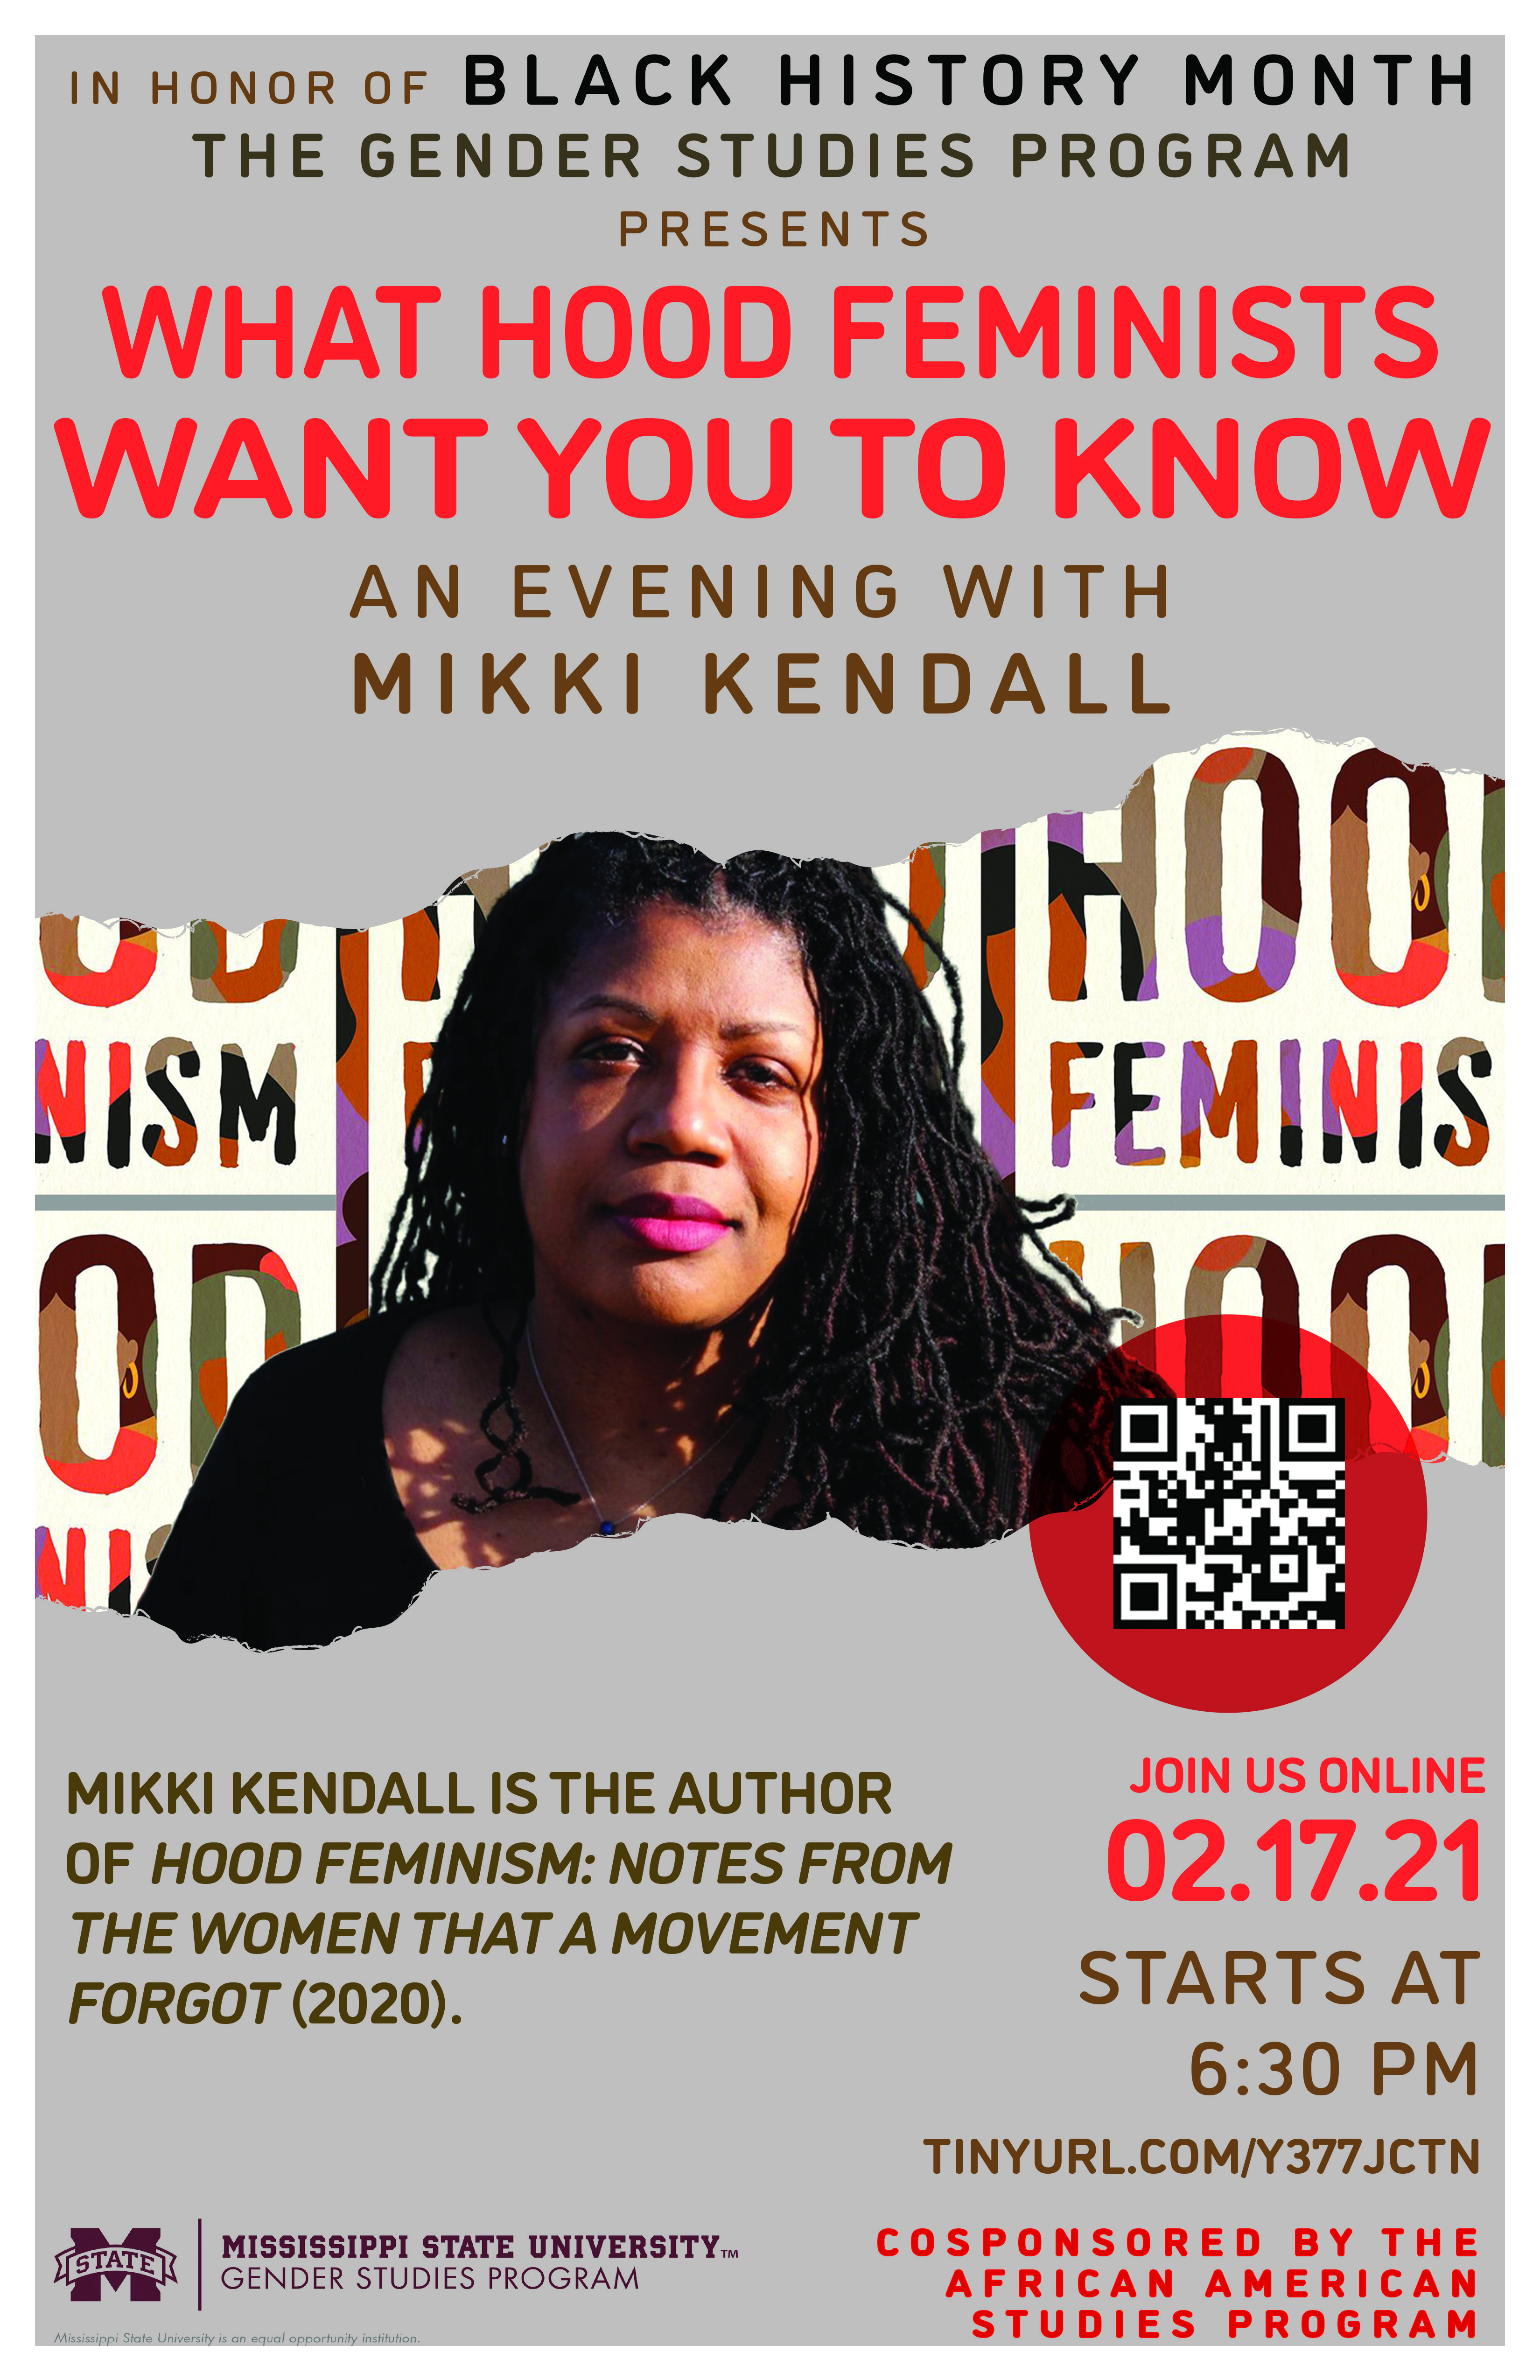 Discussion with Mikki Kendall on February 17, 2021.